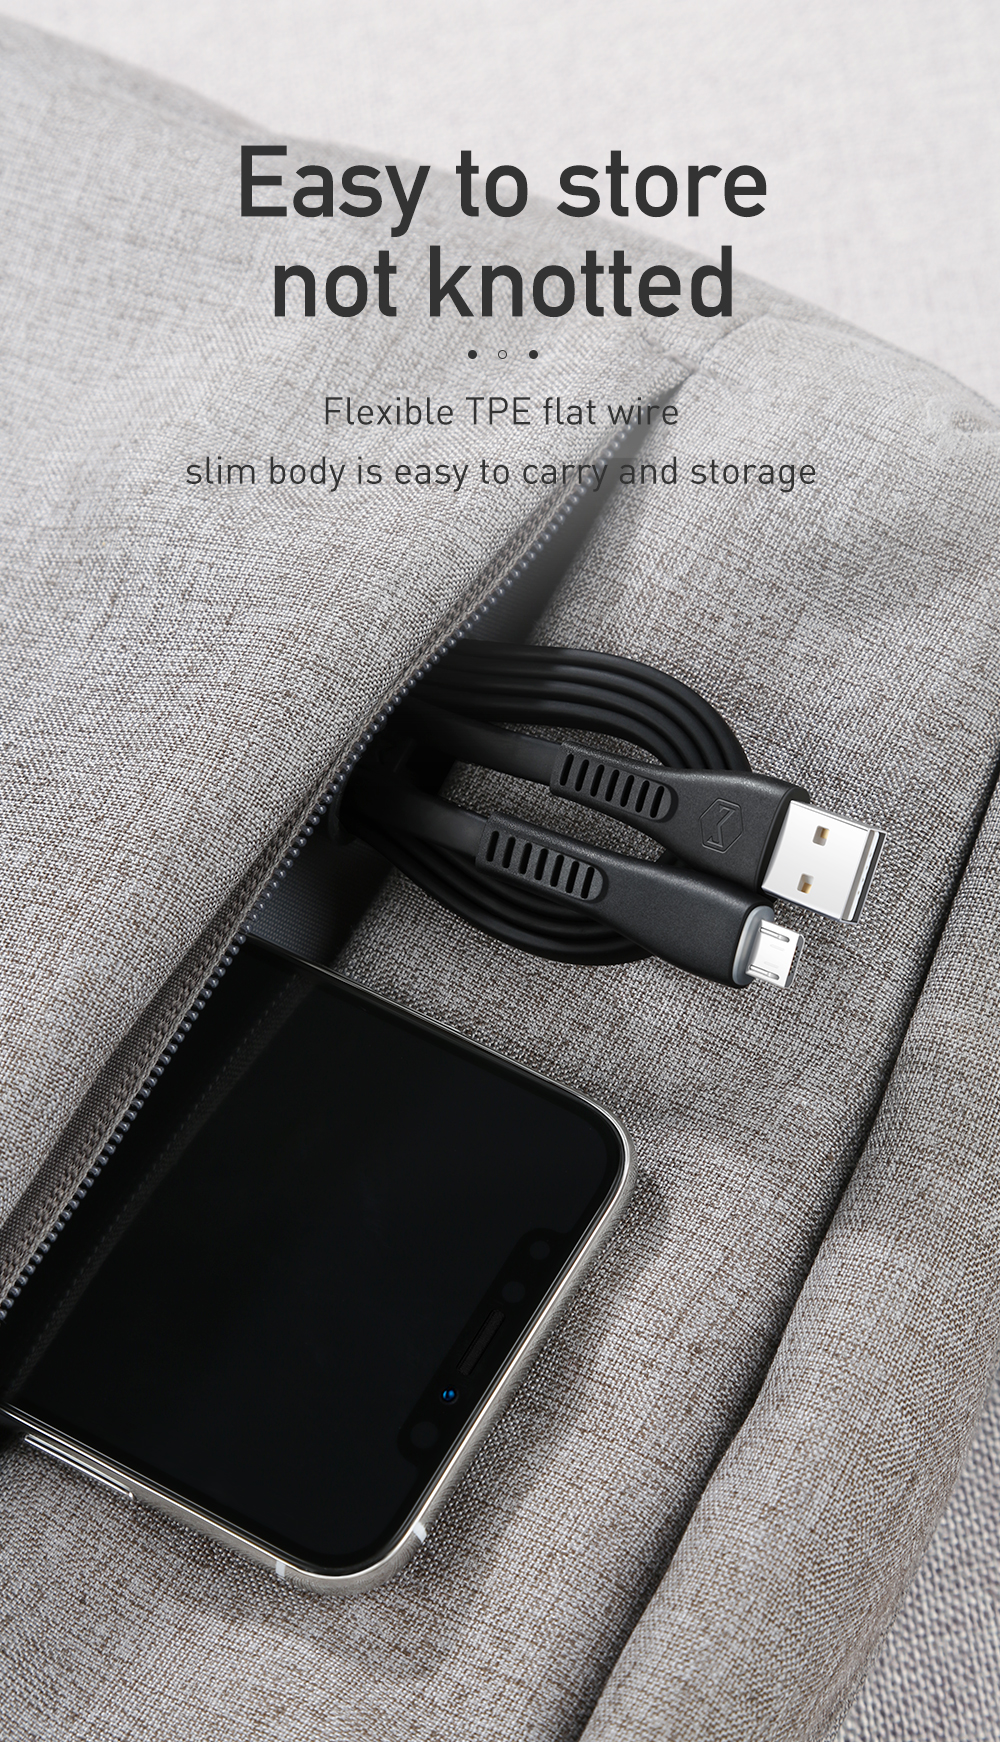 2019 Mcdodo 4ft 1.2m Black White Flat Tangle-free Micro USB Data cable for Huawei Samsung with LED